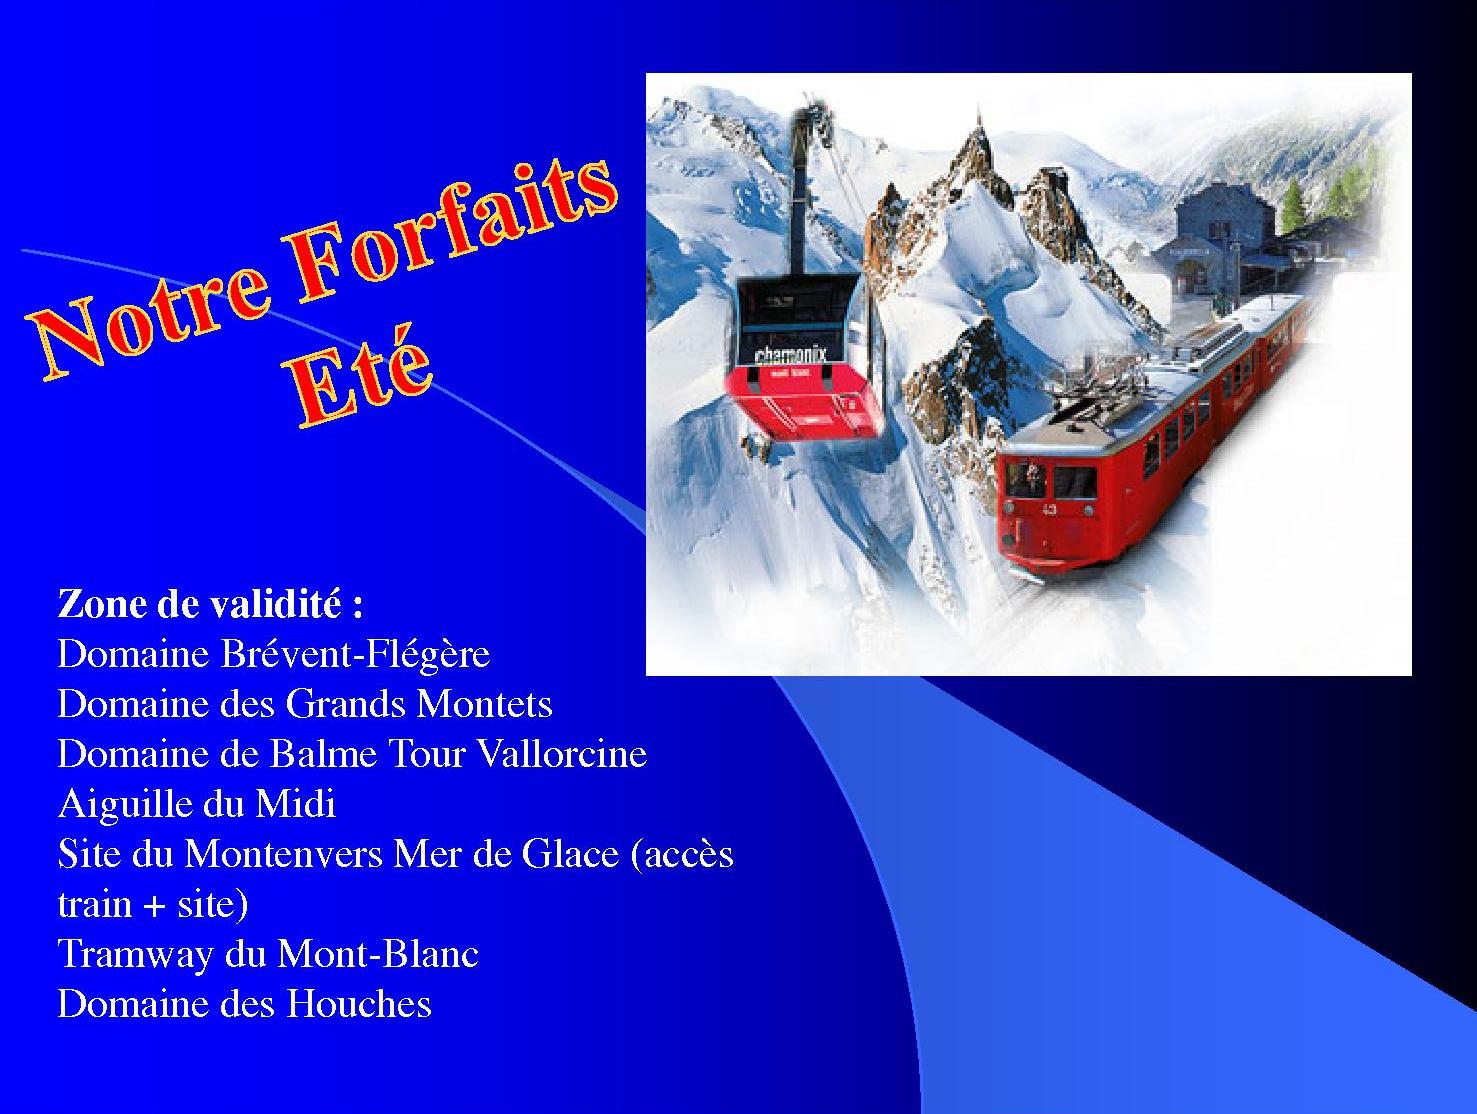 Forfaits val